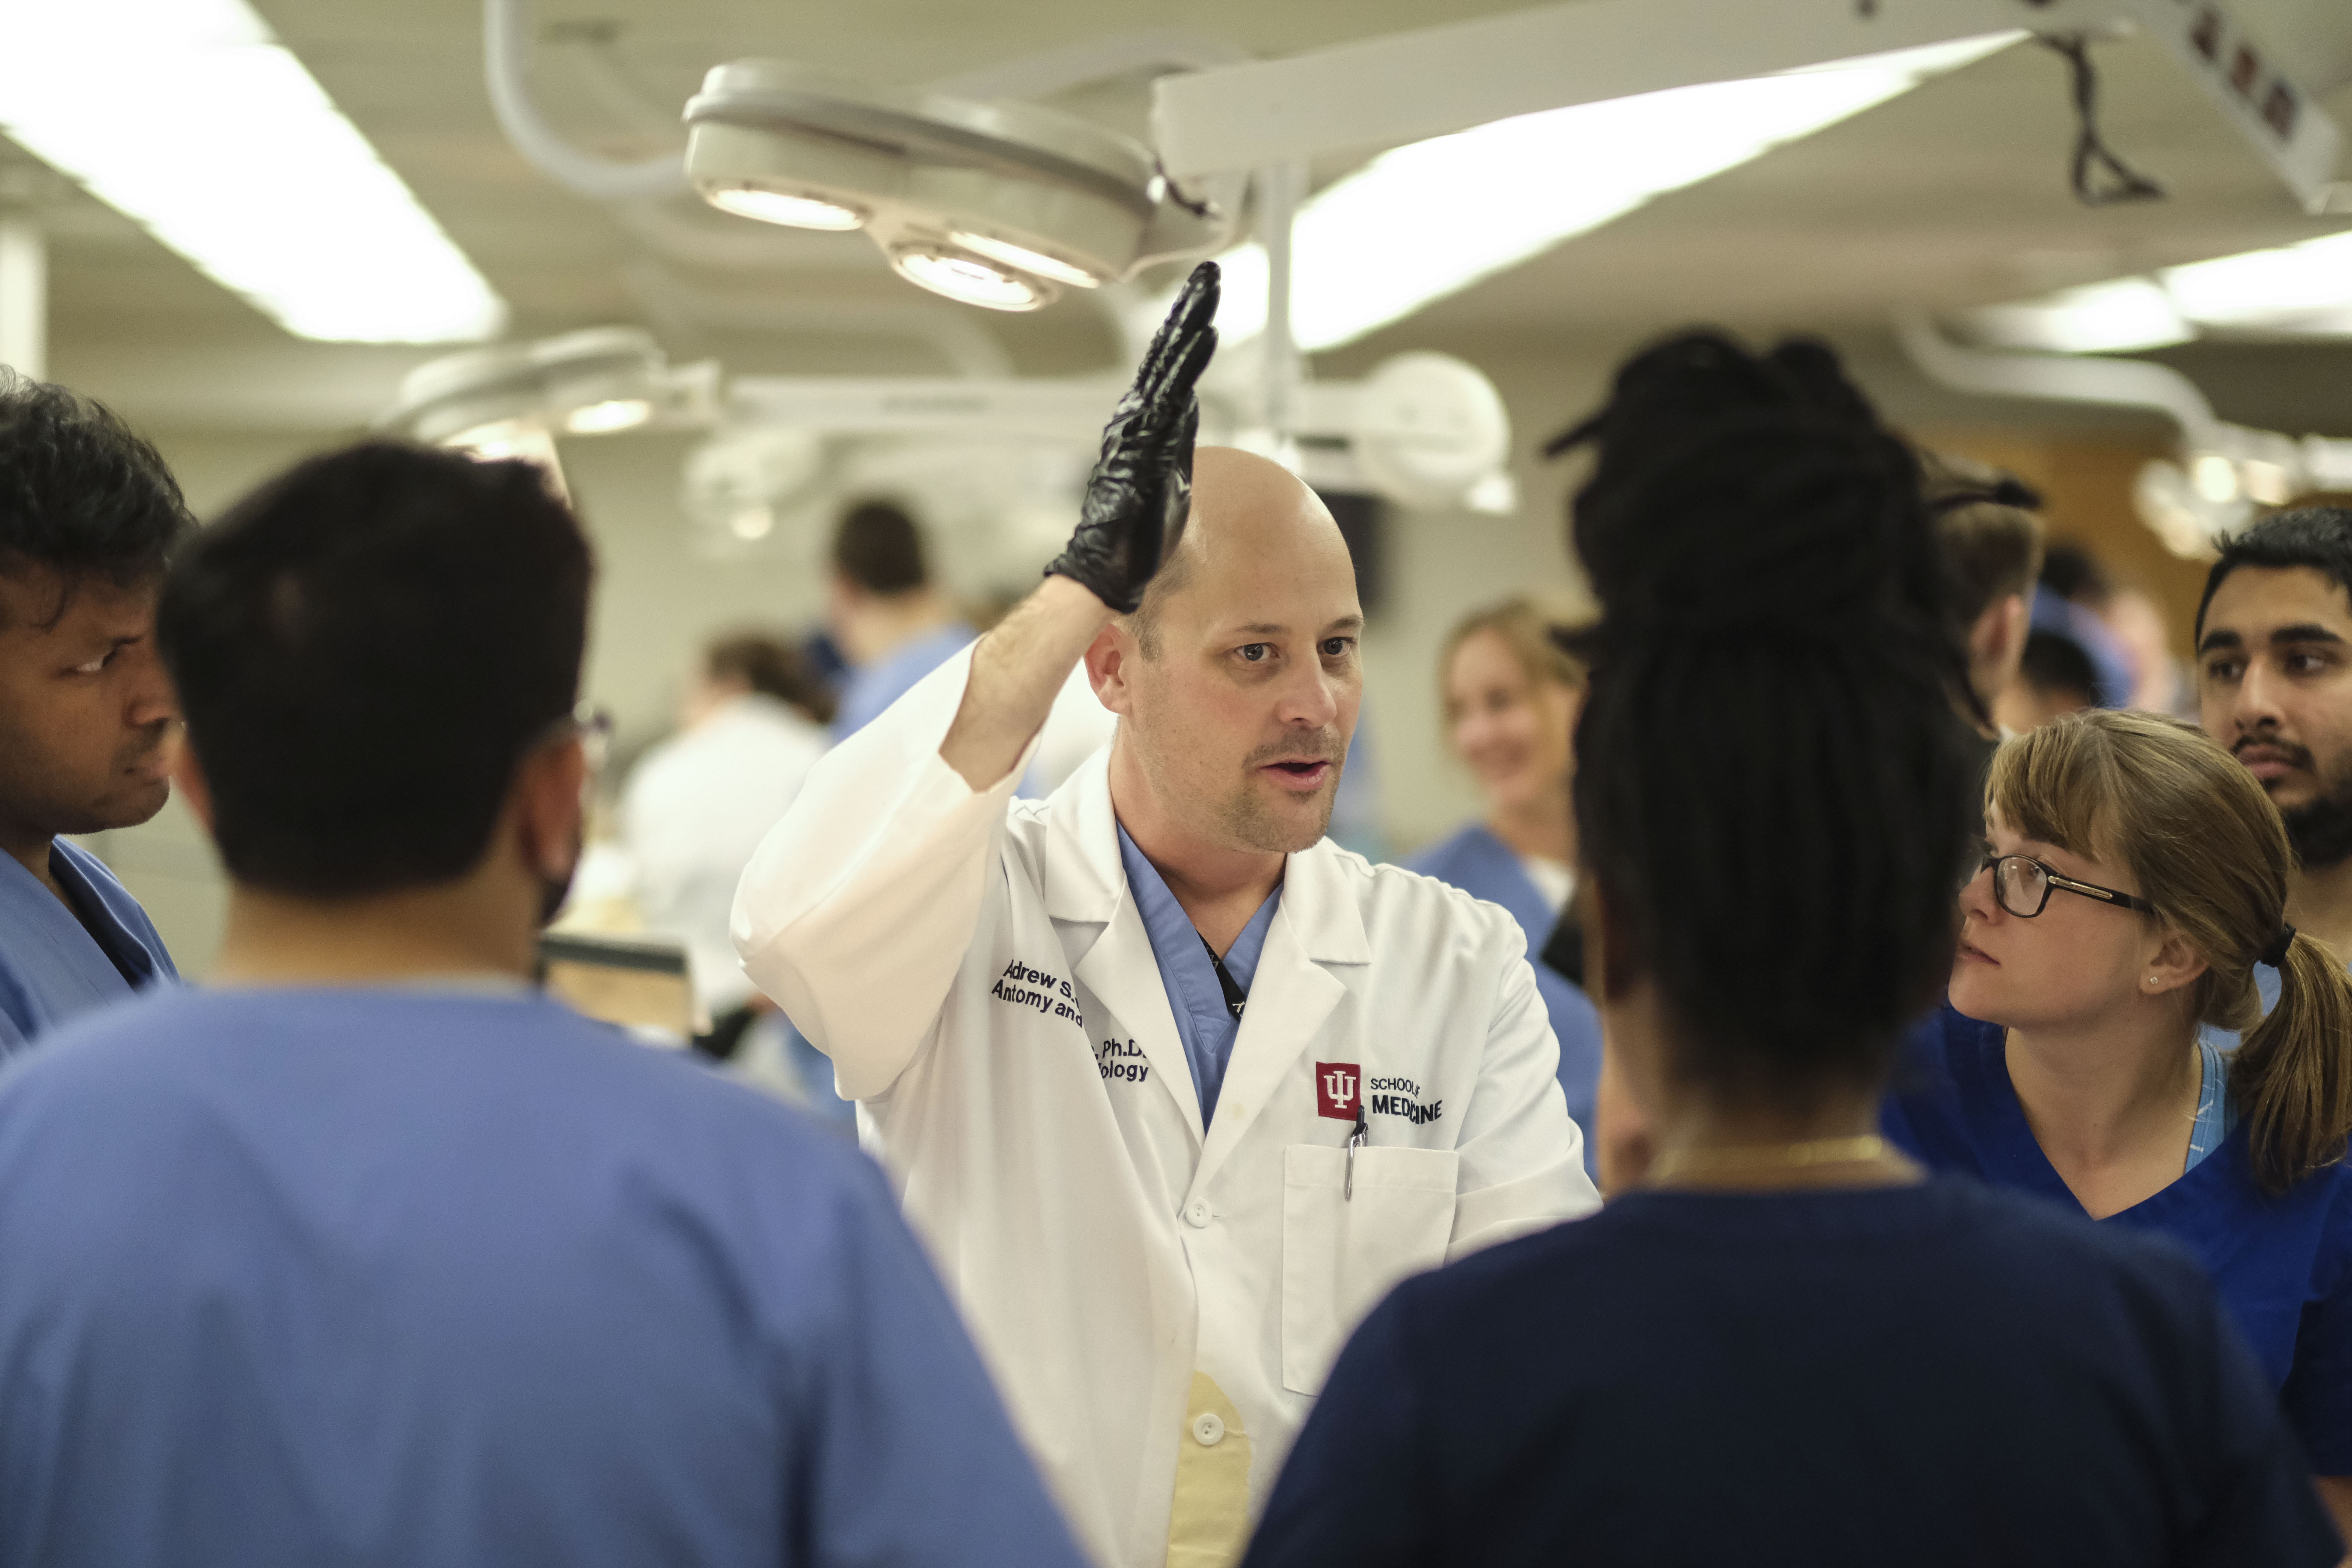 Andrew Deane, PhD, instructs students in the anatomy lab at IU School of Medicine.